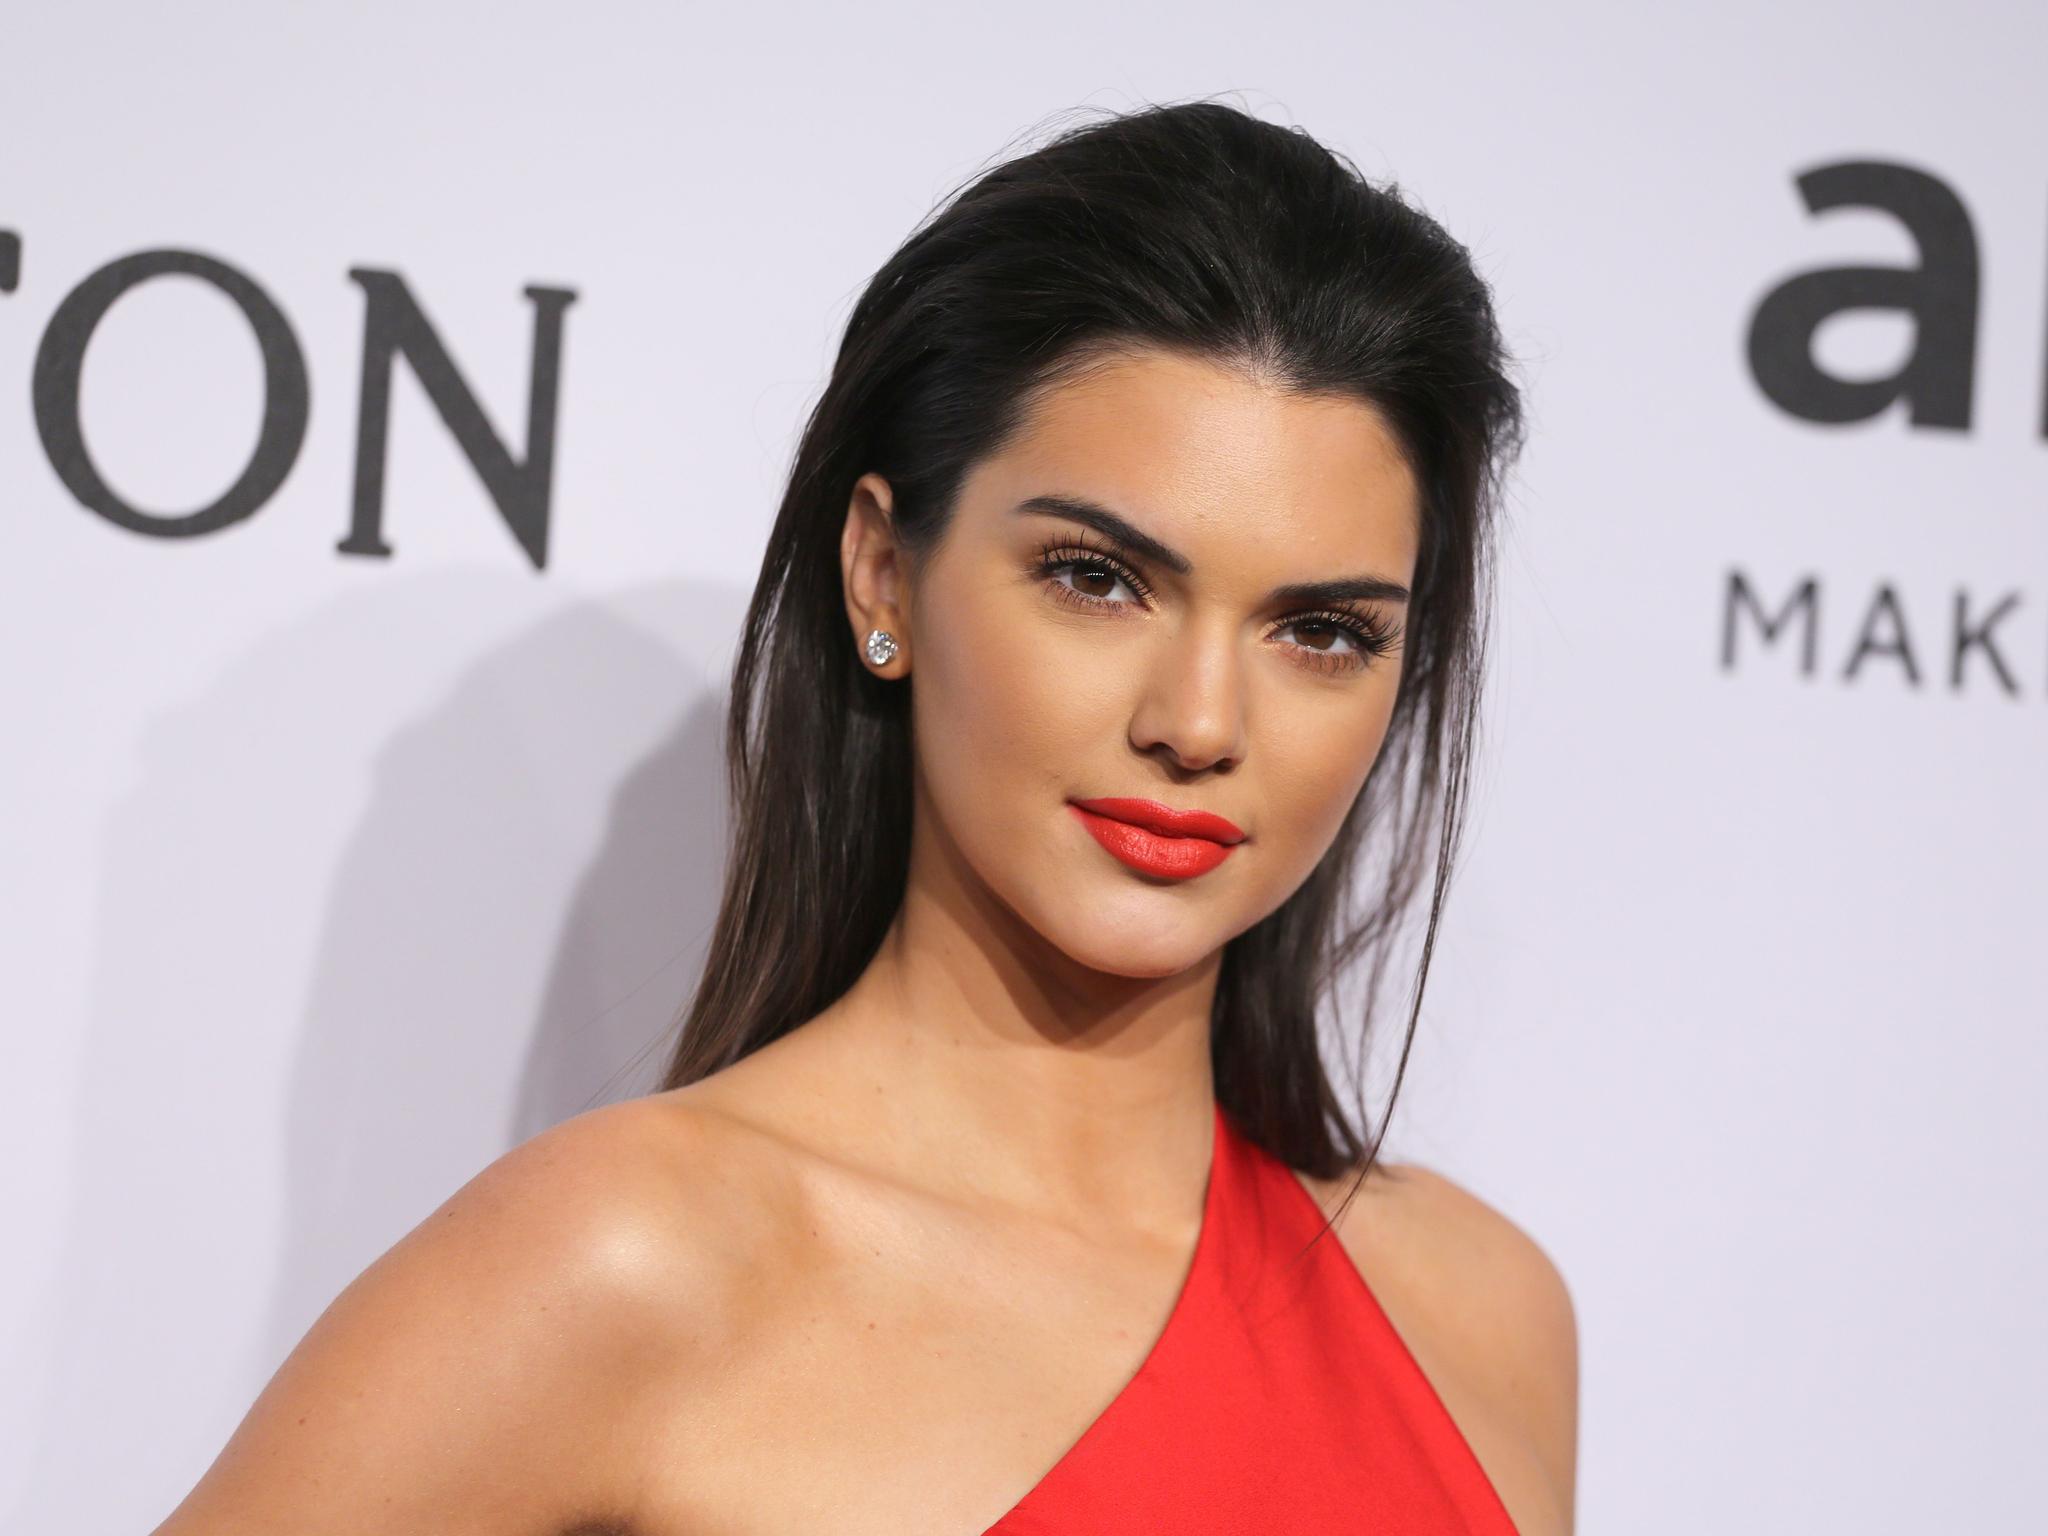 Kendall Jenner age, Birthday, Height, Net Worth, Family, Salary